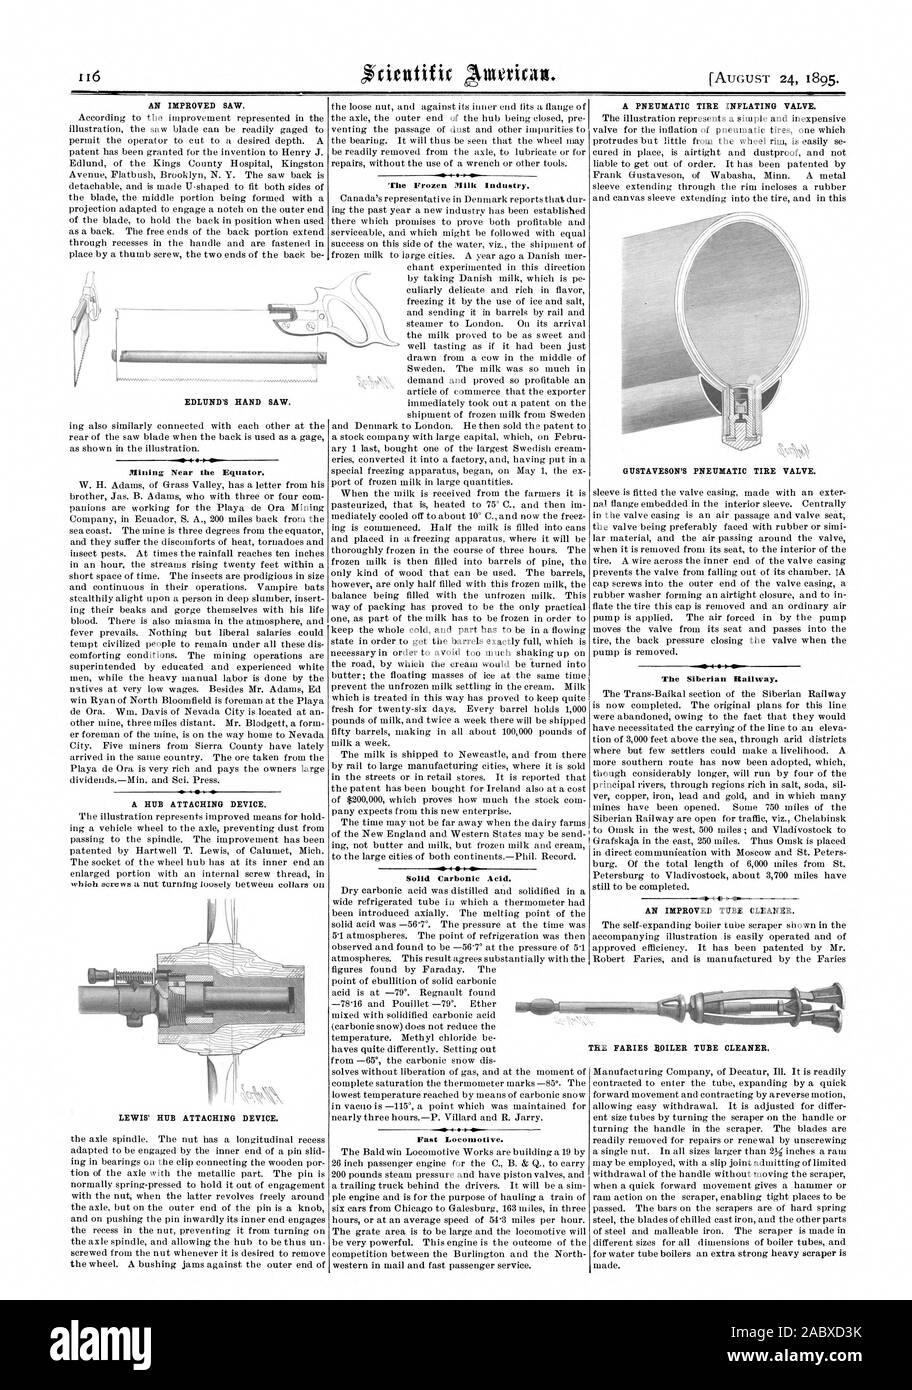 AN IMPROVED SAW. Mining Near the Equator. A HUB ATTACHING DEVICE. LEWIS' HUB ATTACHING DEVICE. The Frozen Milk industry. Solid Carbonic Acid. OB. 4  Fast Locomotive. GUSTAVESON'S PNEUMATIC TIRE VALVE. The Siberian Railway. AN IMPROVED TUBE CLEANER. EDLUND'S HAND SAW. THE FARIES B OILER TUBE CLEANER., scientific american, 1895-08-24 Stock Photo